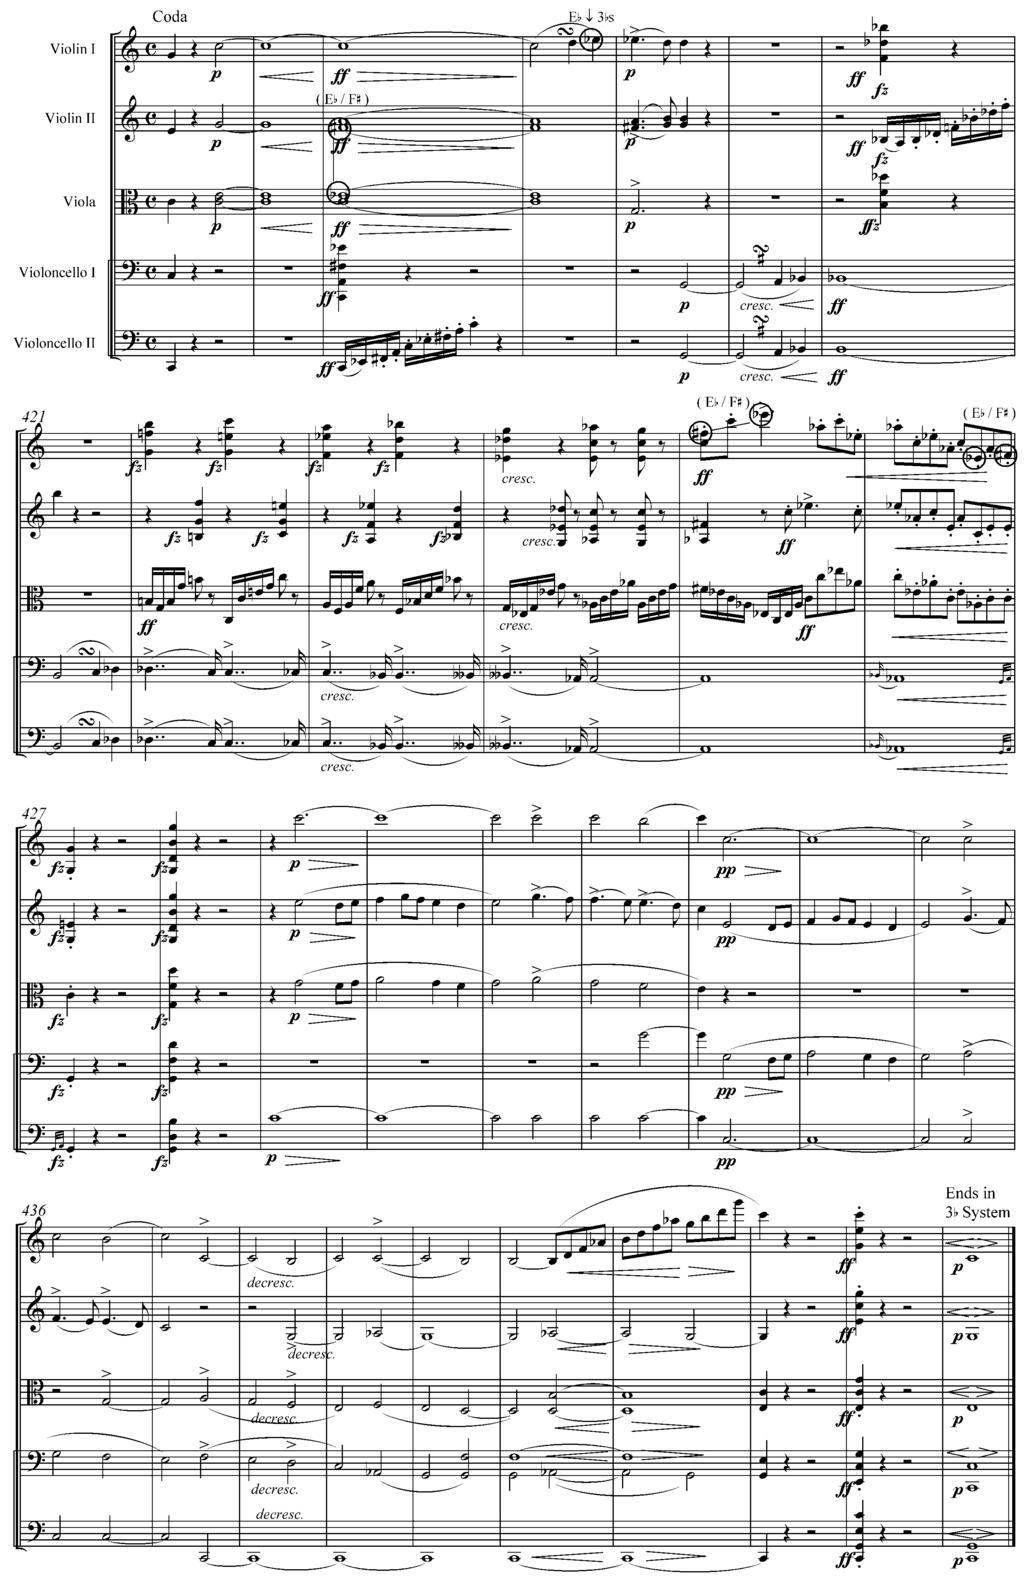 EXAMPLE 6.7d: Schubert, Quintet in C, 1 st Movement, Coda, mm. 414-45 What is perhaps even more remarkable is the conclusion of the last movement.